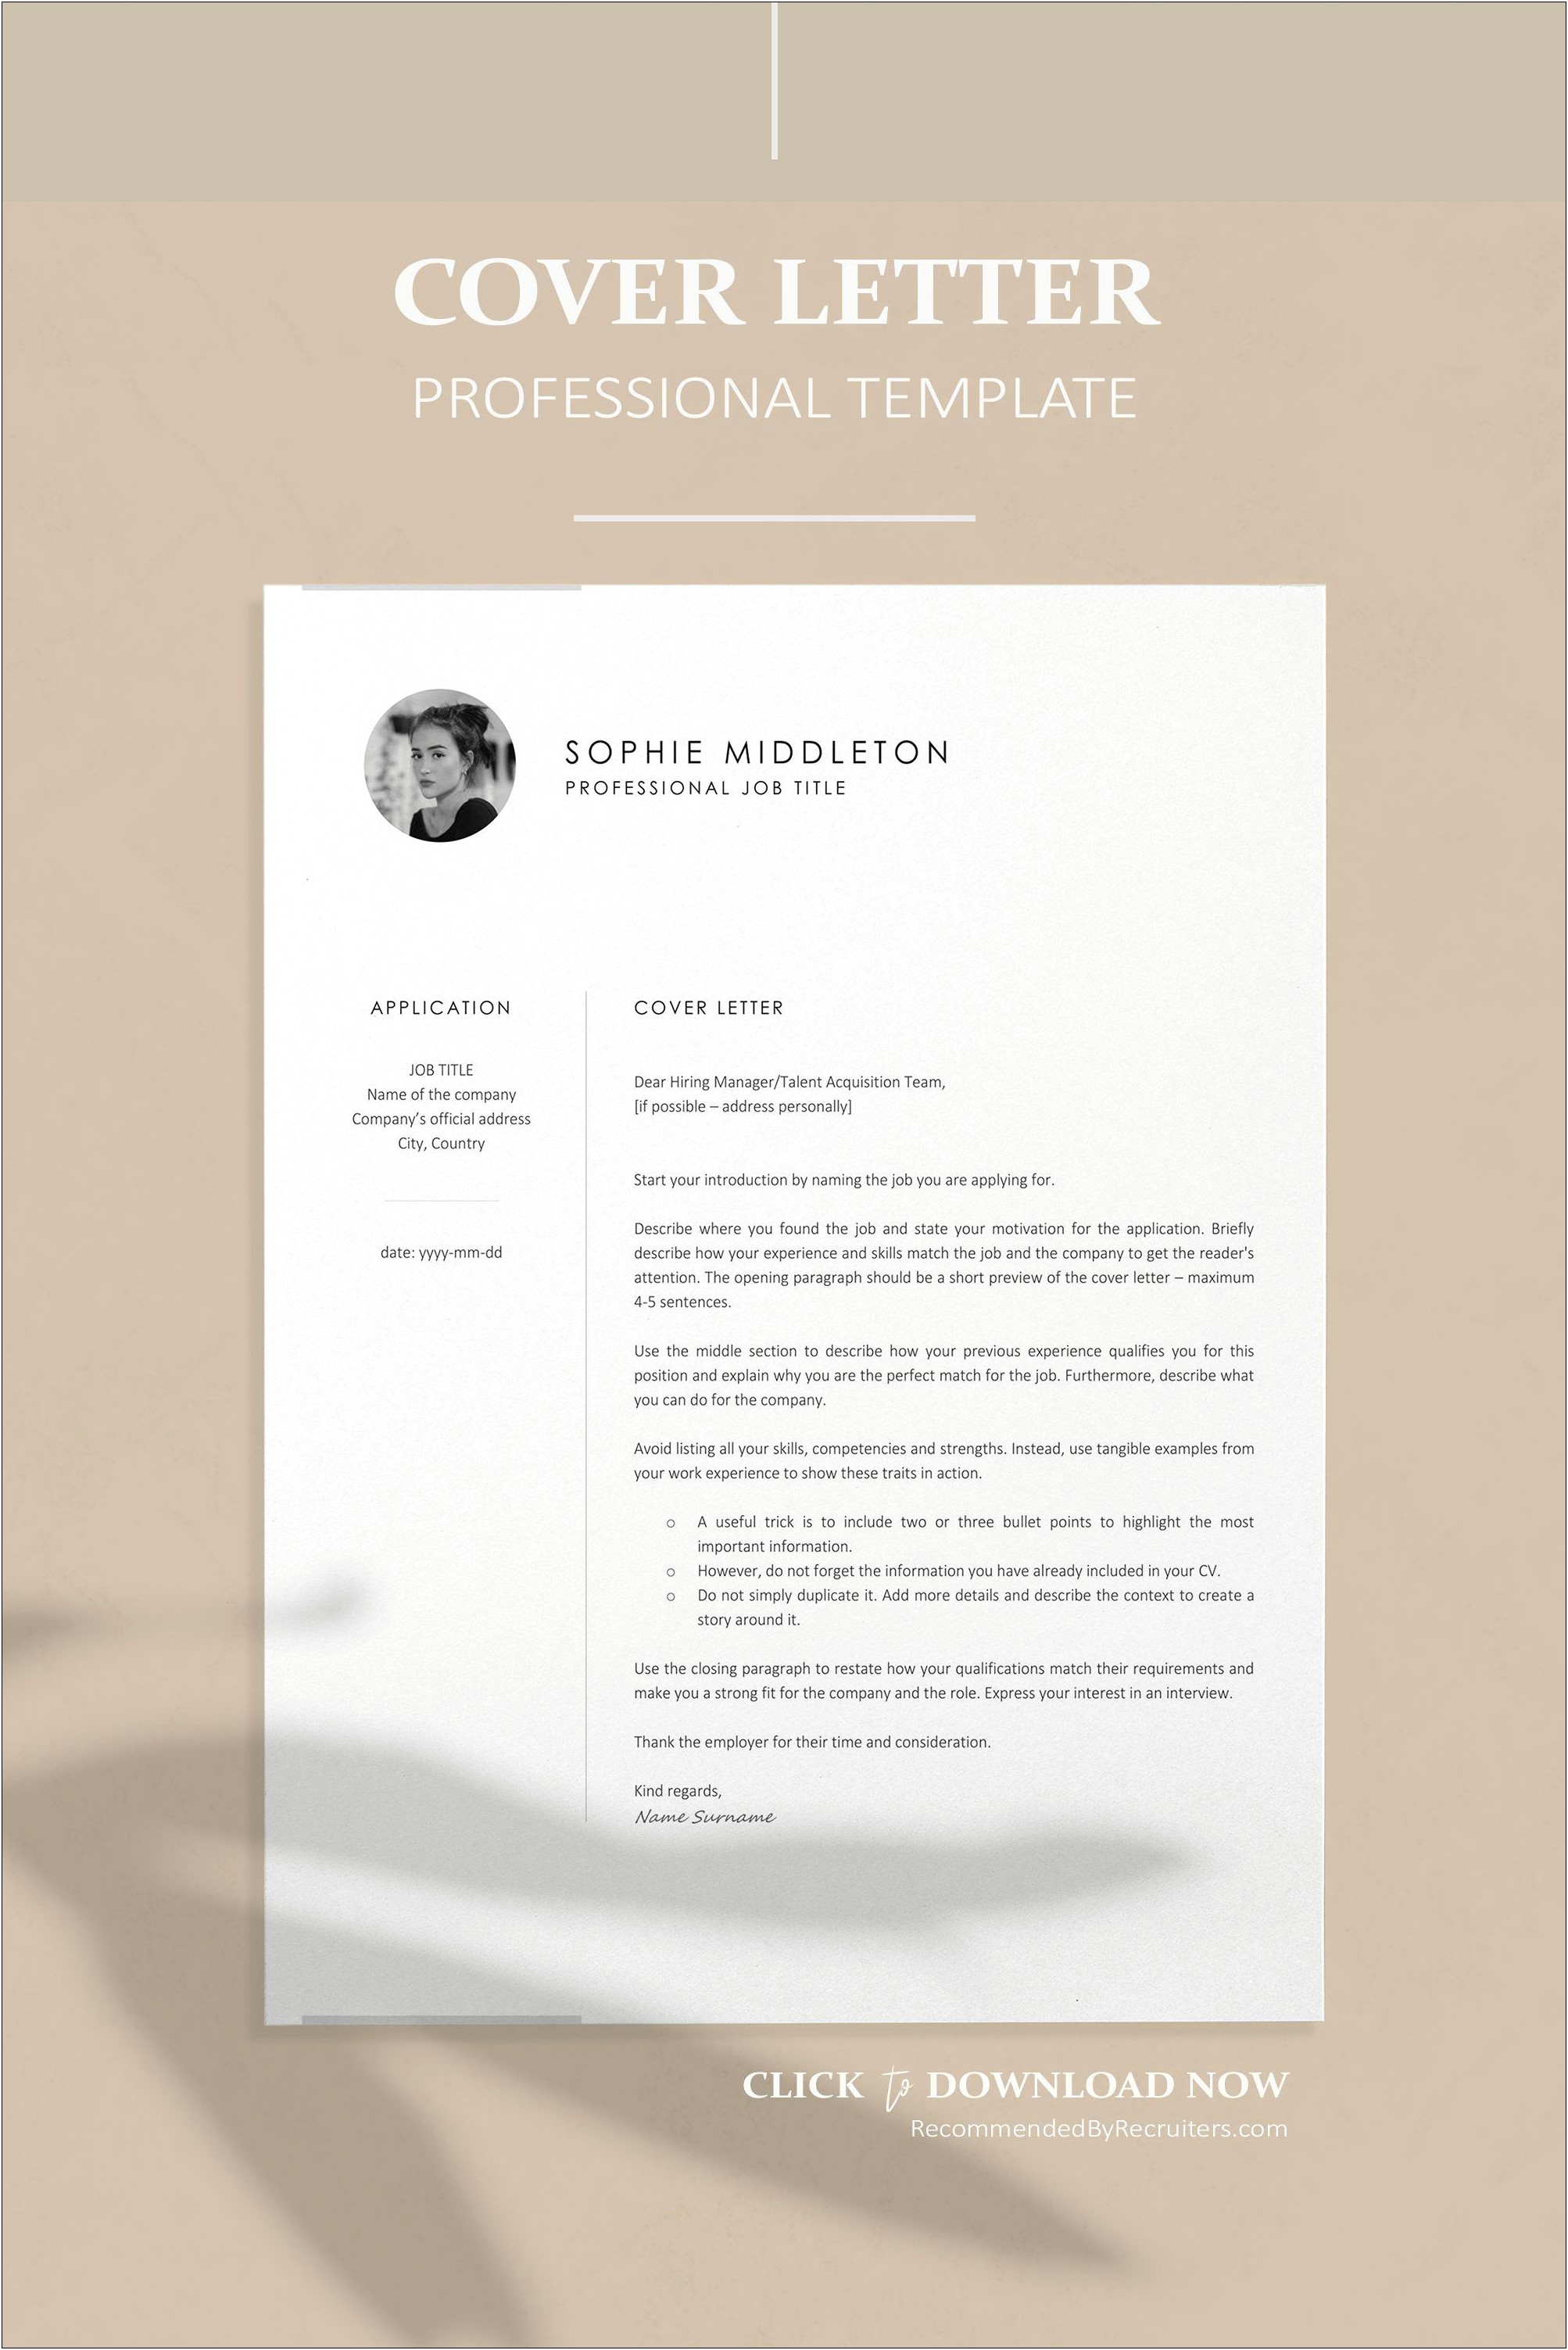 The Importance Of Resumes And Cover Letter